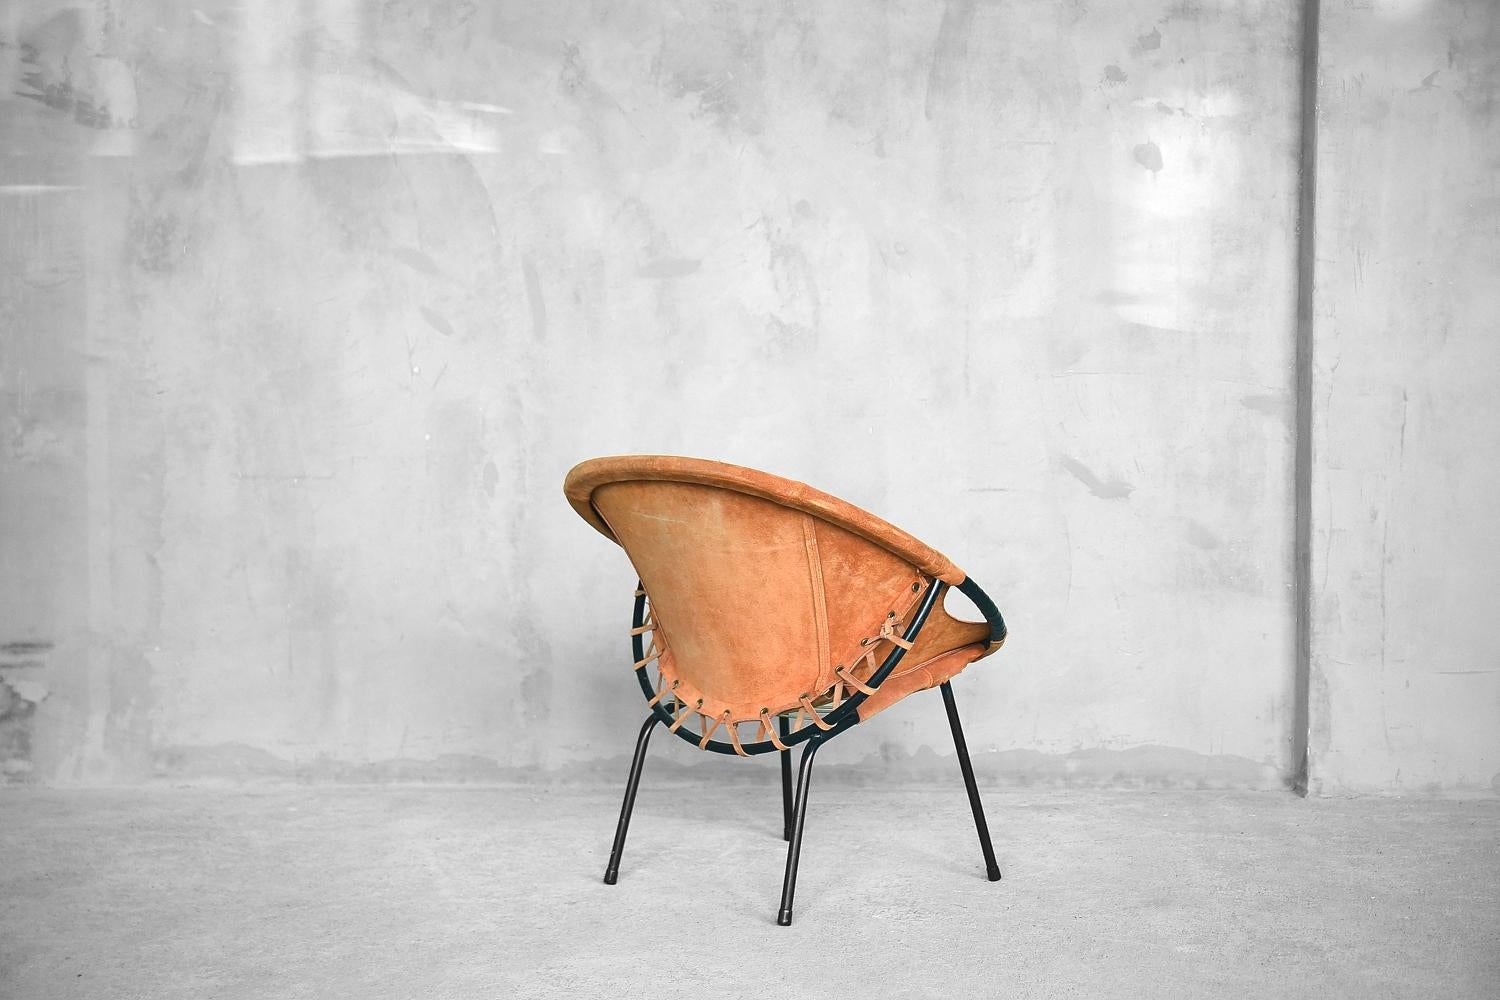 Mid-20th Century Midcentury Circle Balloon Chair by Lusch Erzeugnis for Lusch & Co., 1960s For Sale